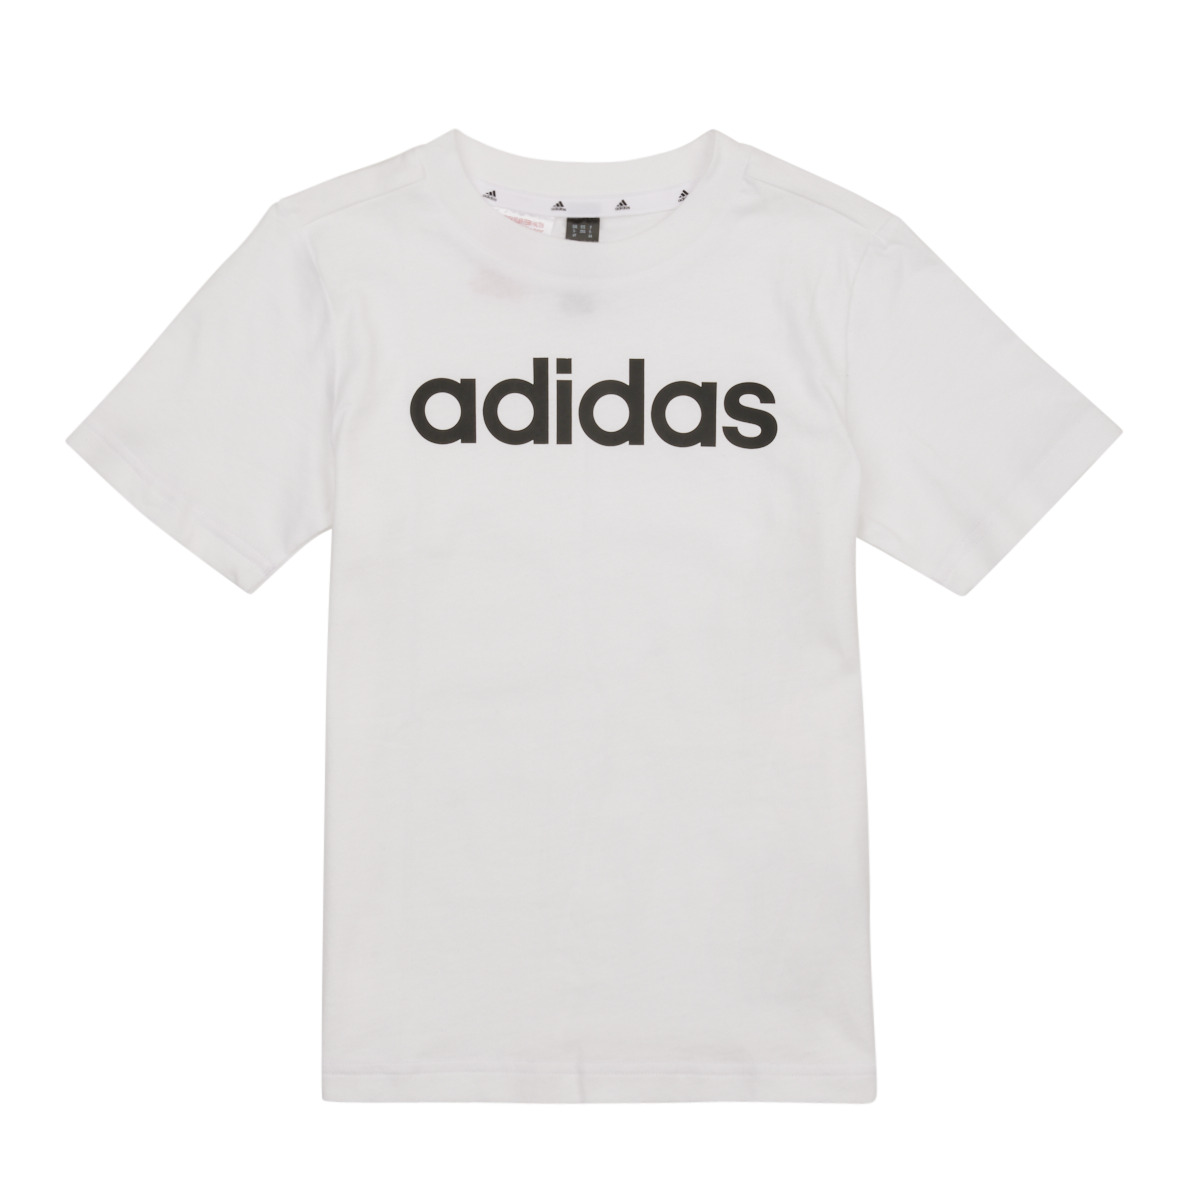 Vêtements Enfant adidas pure boost malaysia price guide online LK LIN CO TEE Blanc